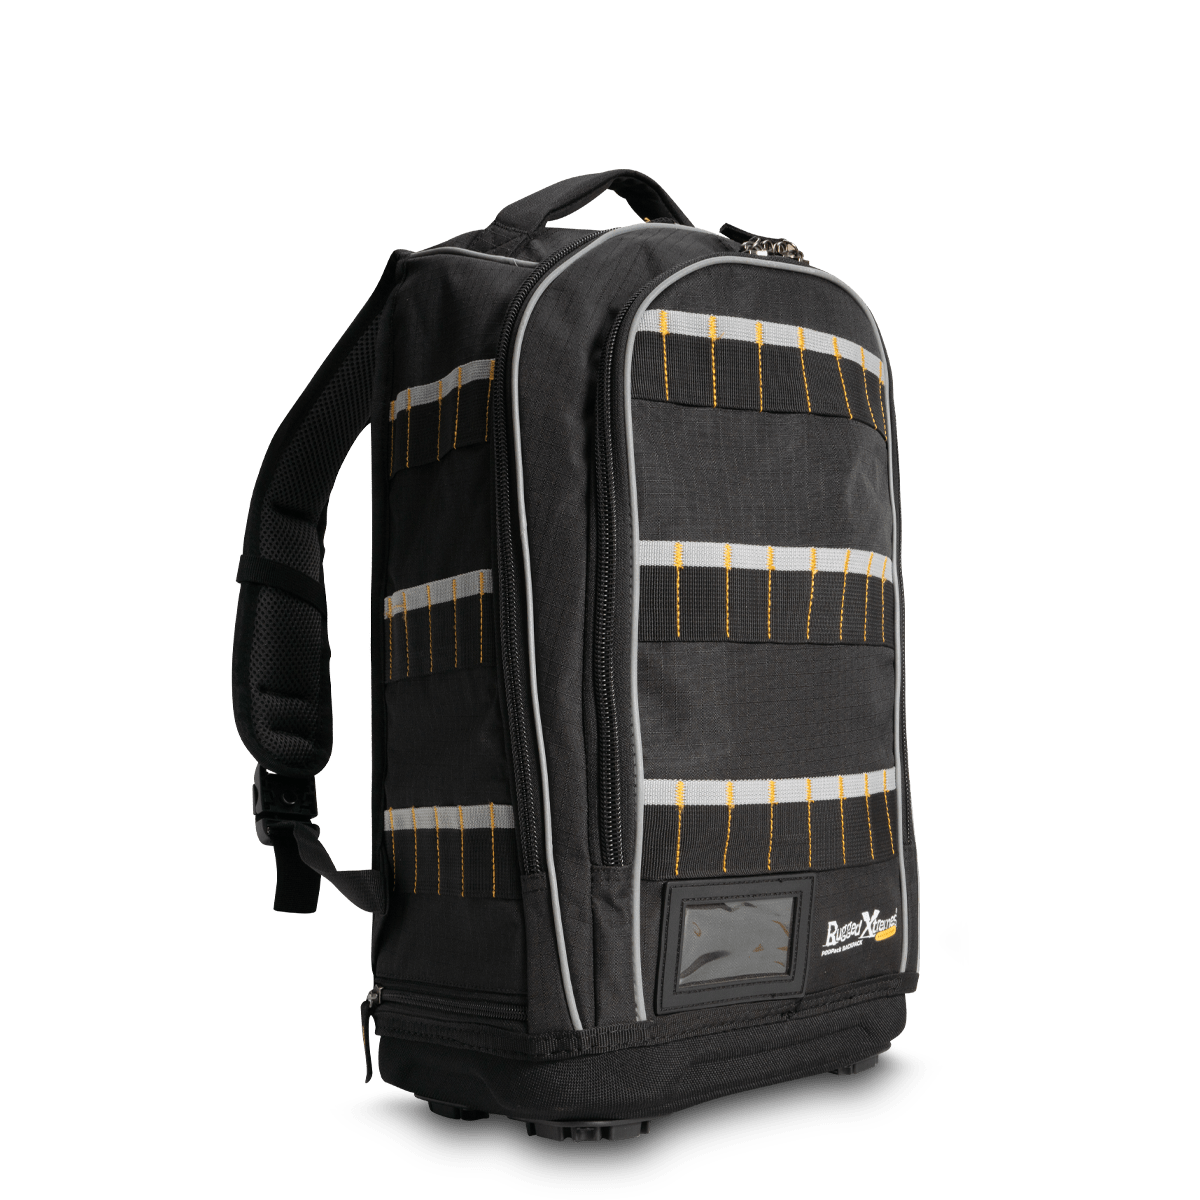 PODconnect Backpack - Rugged Xtremes